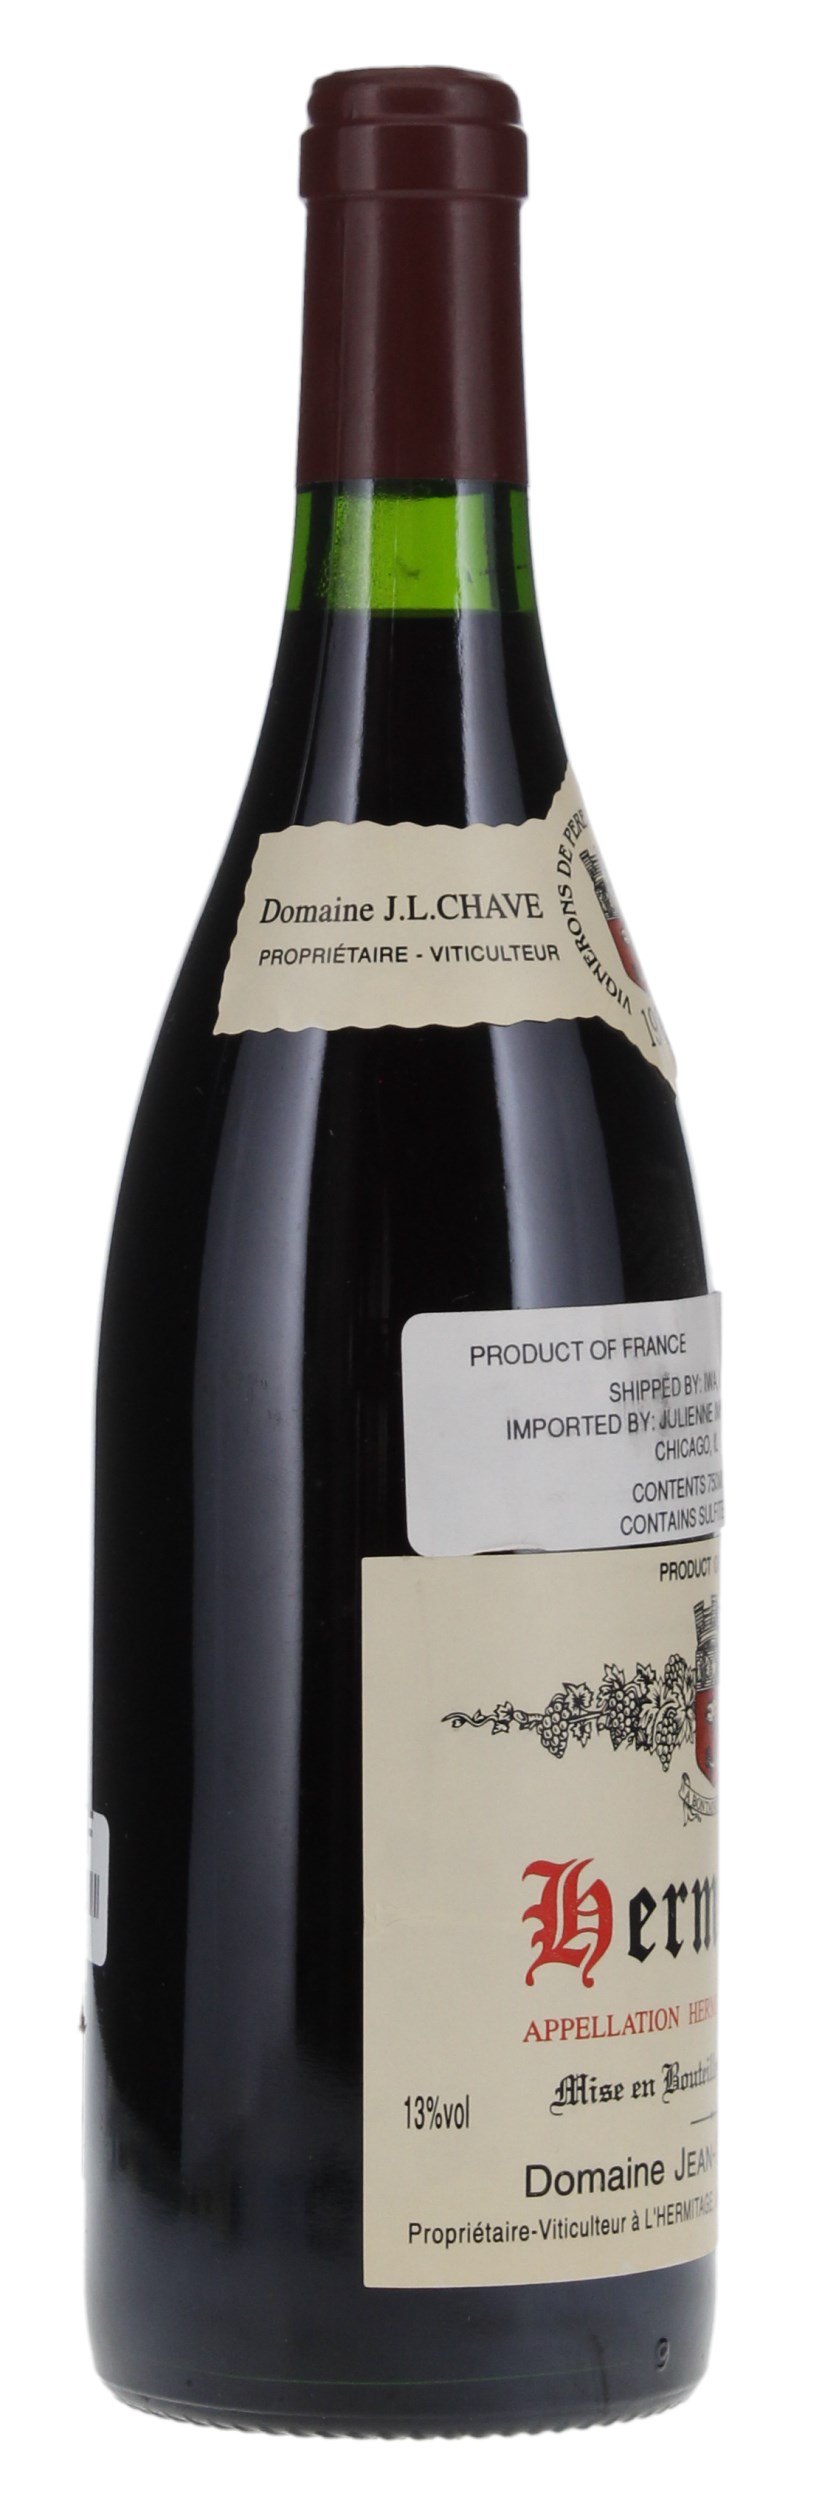 1989 Jean-Louis Chave Hermitage, 750ml